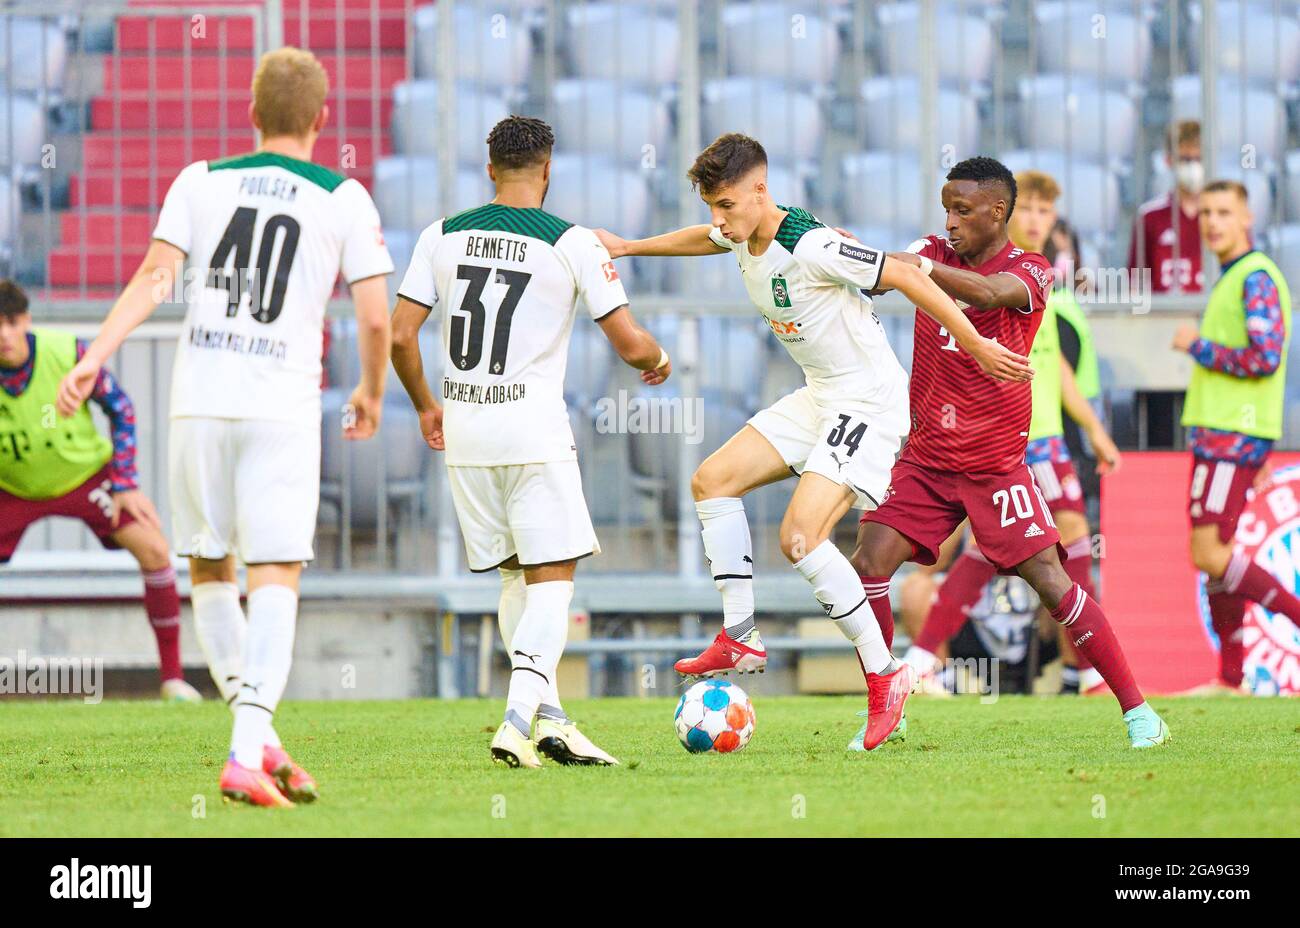 Bouna SARR, FCB 20  compete for the ball, tackling, duel, header, zweikampf, action, fight against Conor Noss, MG 34 Keanan BENNETTS, MG 37 Andreas Poulsen, MG 40  in the friendly match FC BAYERN MUENCHEN - BORUSSIA MÖNCHENGLADBACH 0-2  on July 28, 2021 in Munich, Germany  Season 2021/2022, matchday X, 1.Bundesliga, FCB, Gladbach, München, X.Spieltag. © Peter Schatz / Alamy Live News Stock Photo